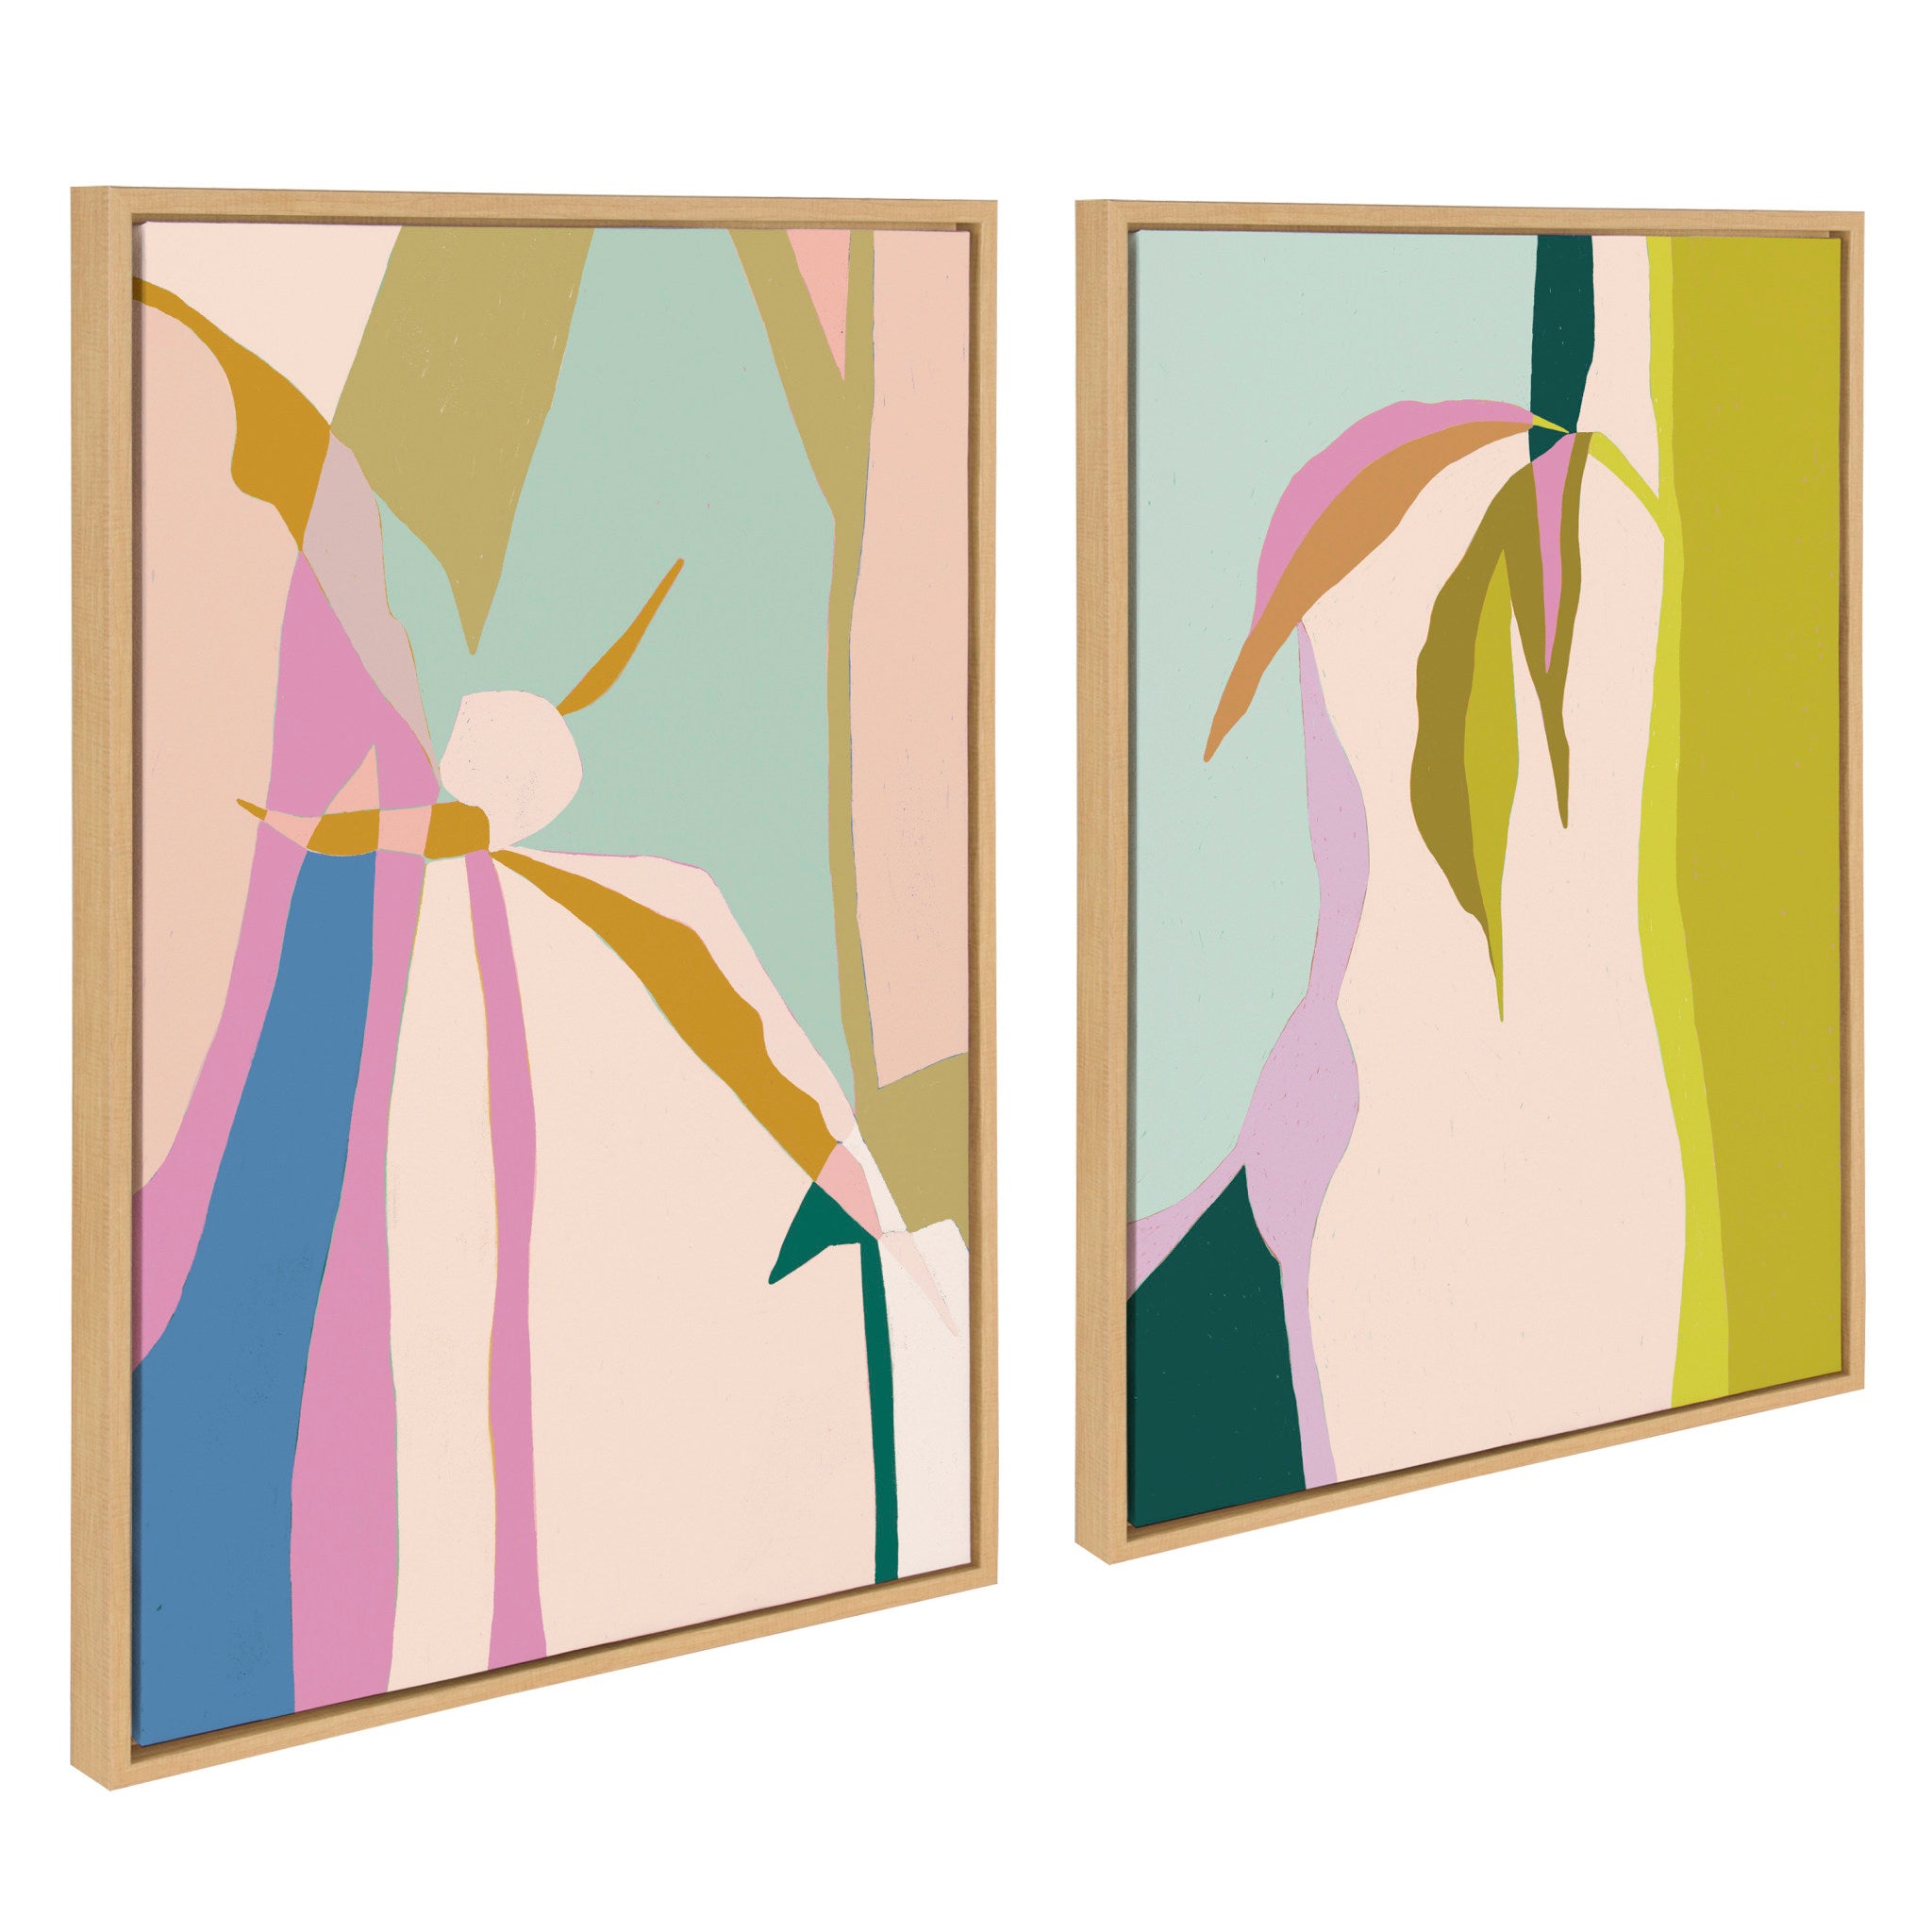 Sylvie Delight in the Moment 1 and 2 Framed Canvas by Alicia Schultz